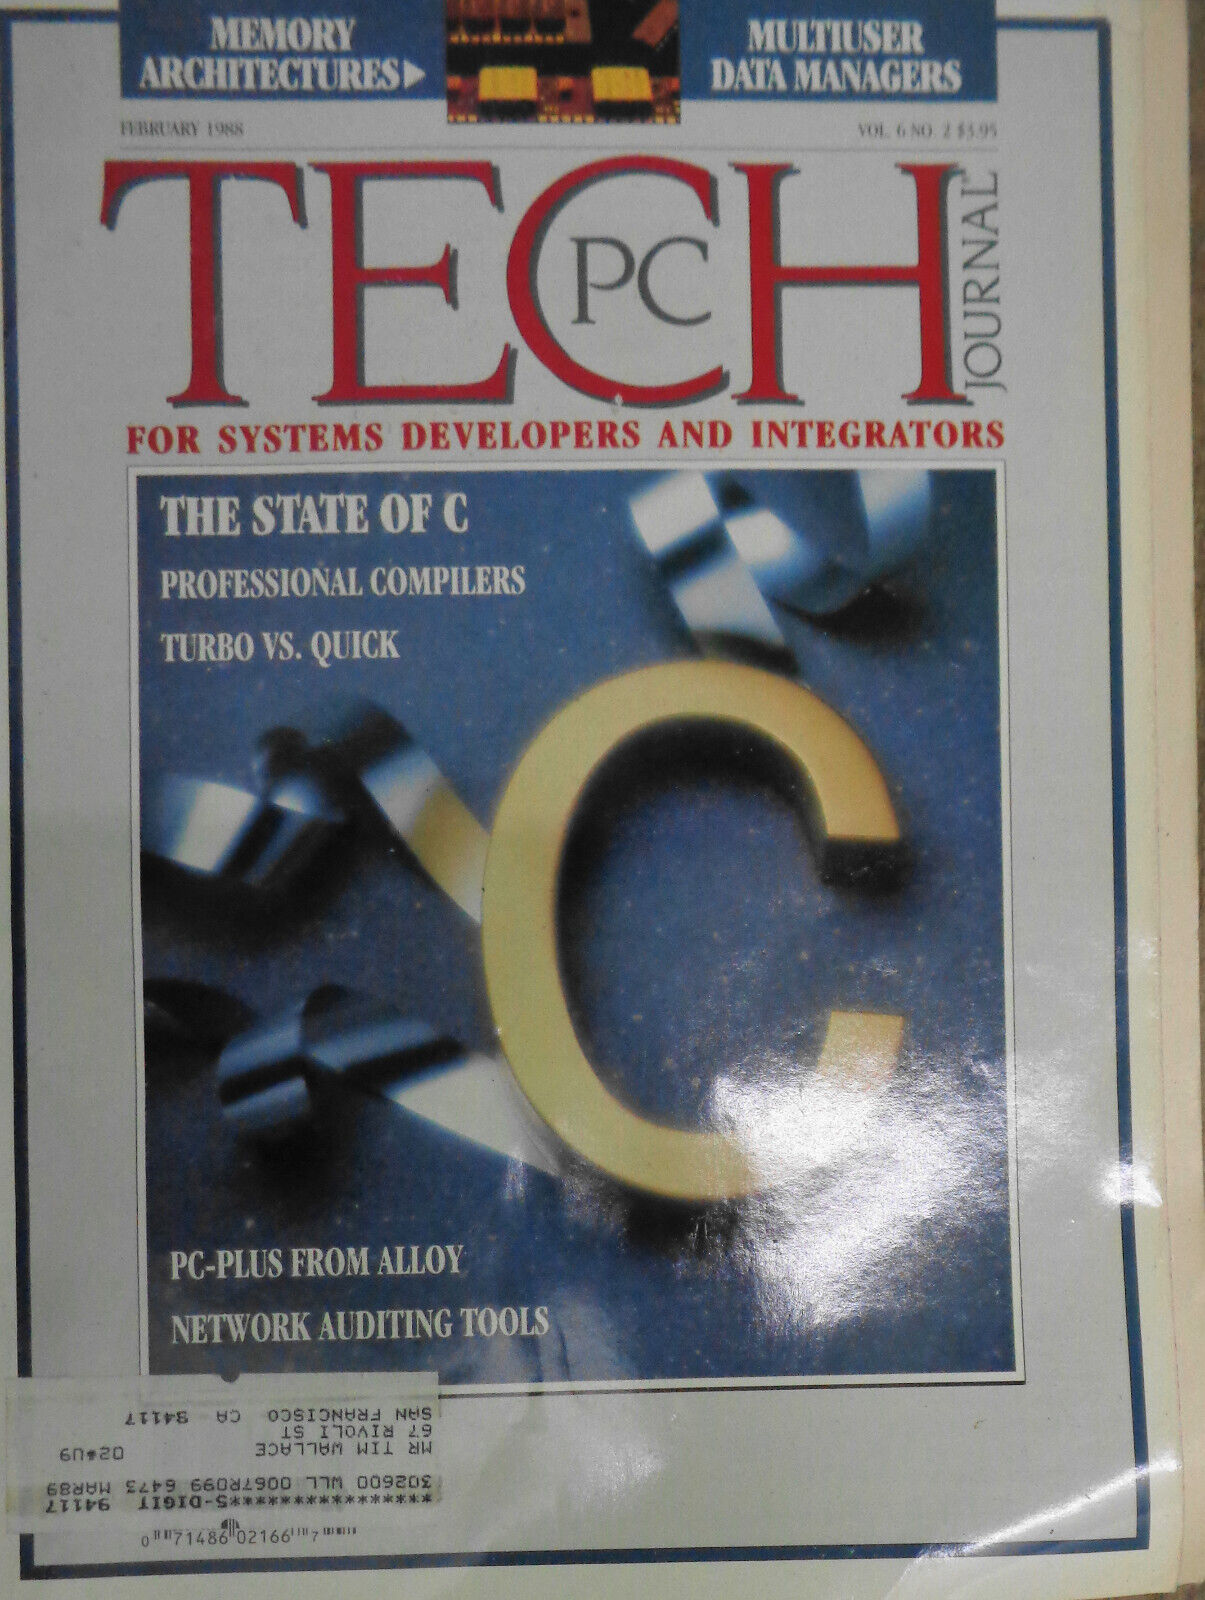 PC Tech Journal, February 1988 -- The State of C; Profreeional Compilers, etc 